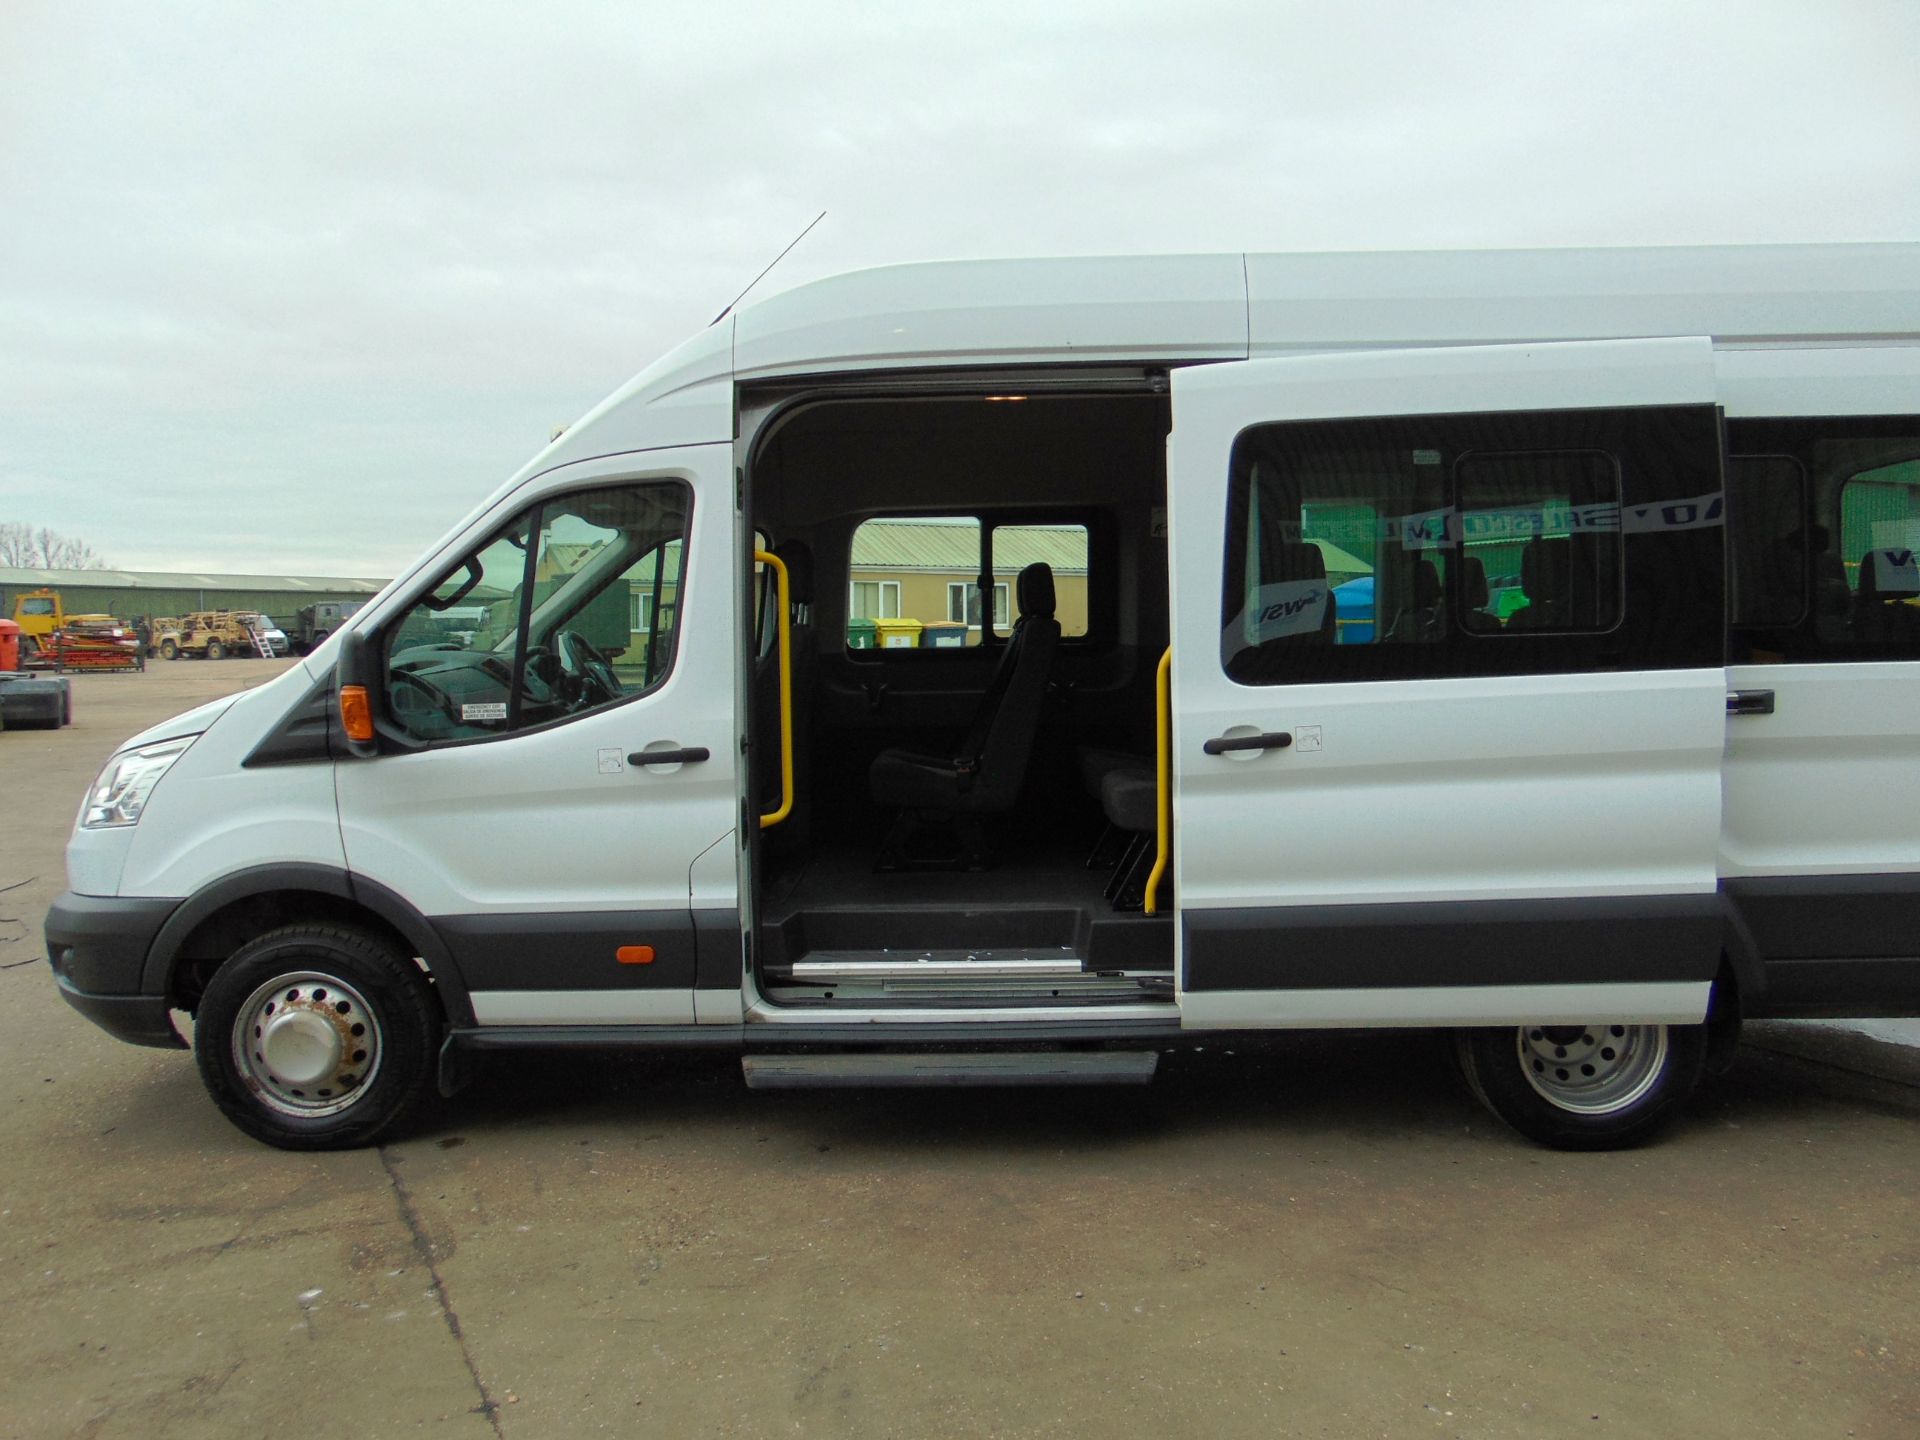 2014 Ford Transit 2.2 TDCi 460E 17 Seat Minibus ONLY 74,813 km! - Image 12 of 36